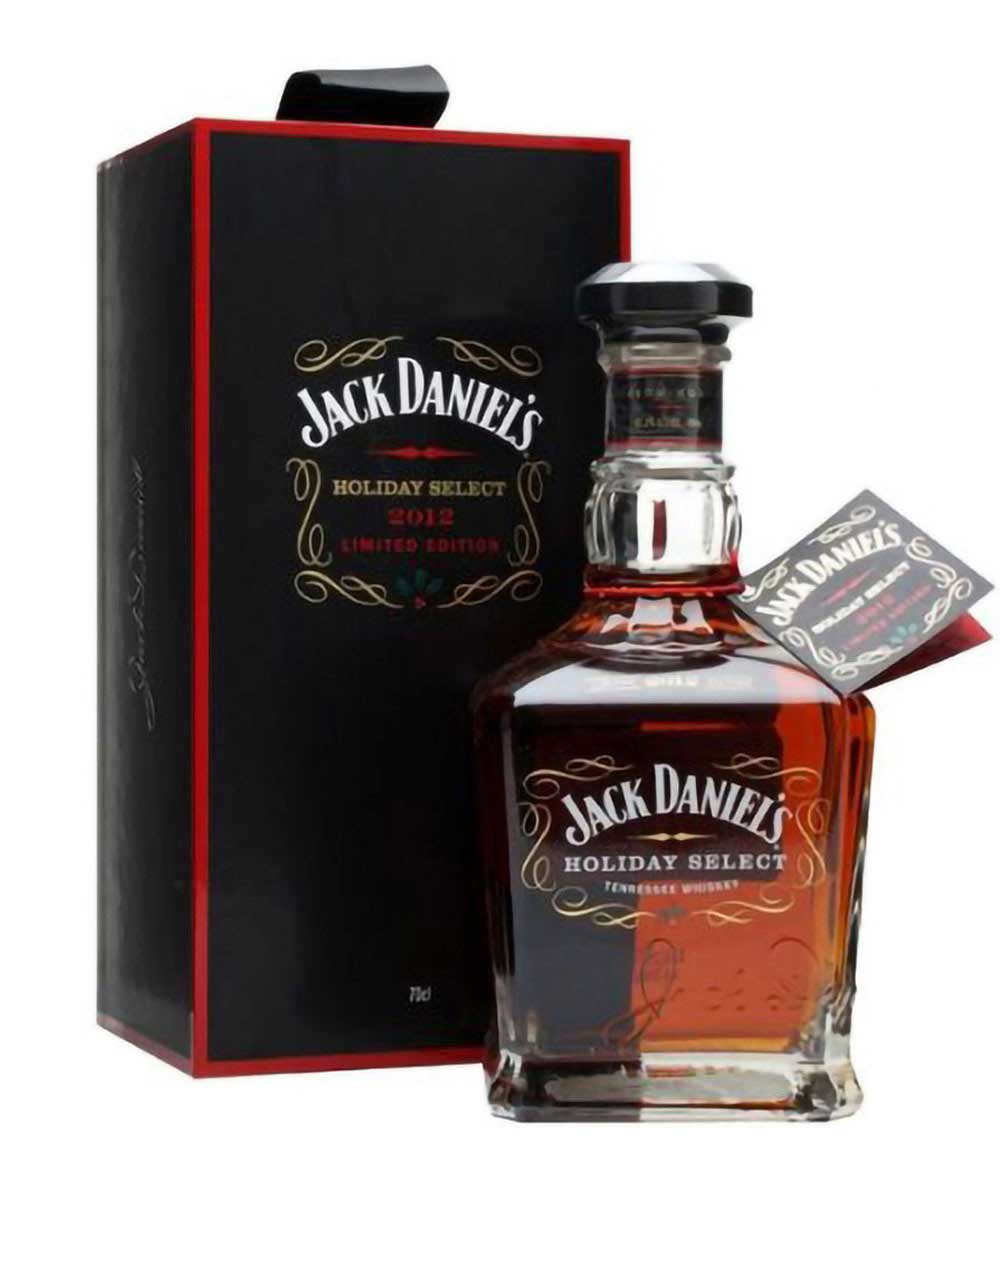 Jack Daniel's Holiday Barrel Select Limited Edition Tennessee Whiskey